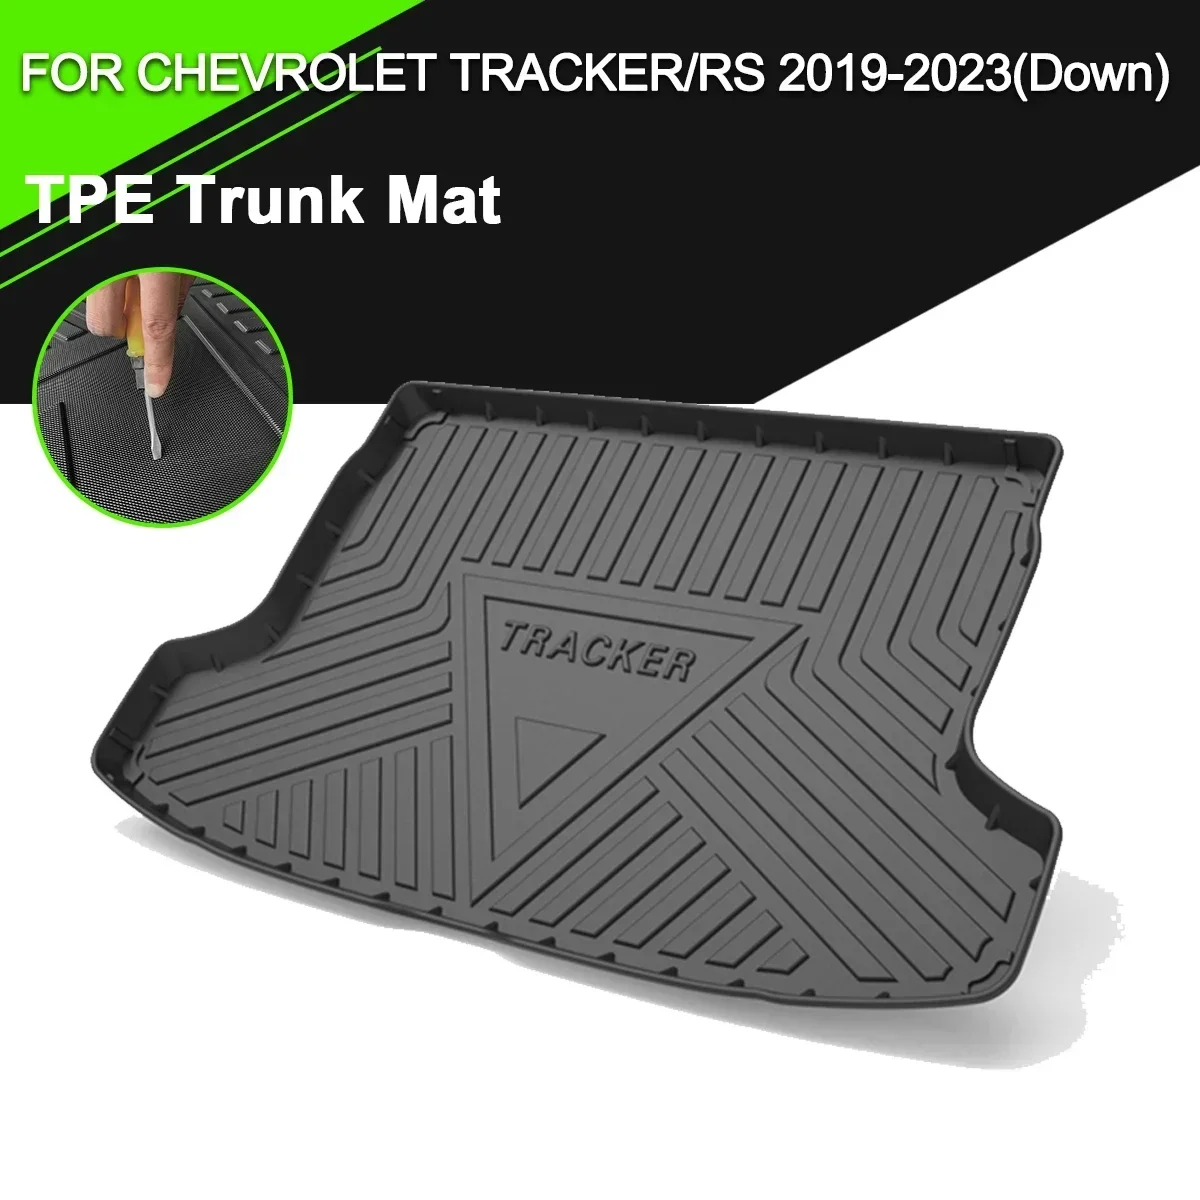 

Car Rear Trunk Cover Mat TPE Waterproof Non-Slip Rubber Cargo Liner Accessories For Chevrolet Tracker/Tracker RS 2019-2023(Down)